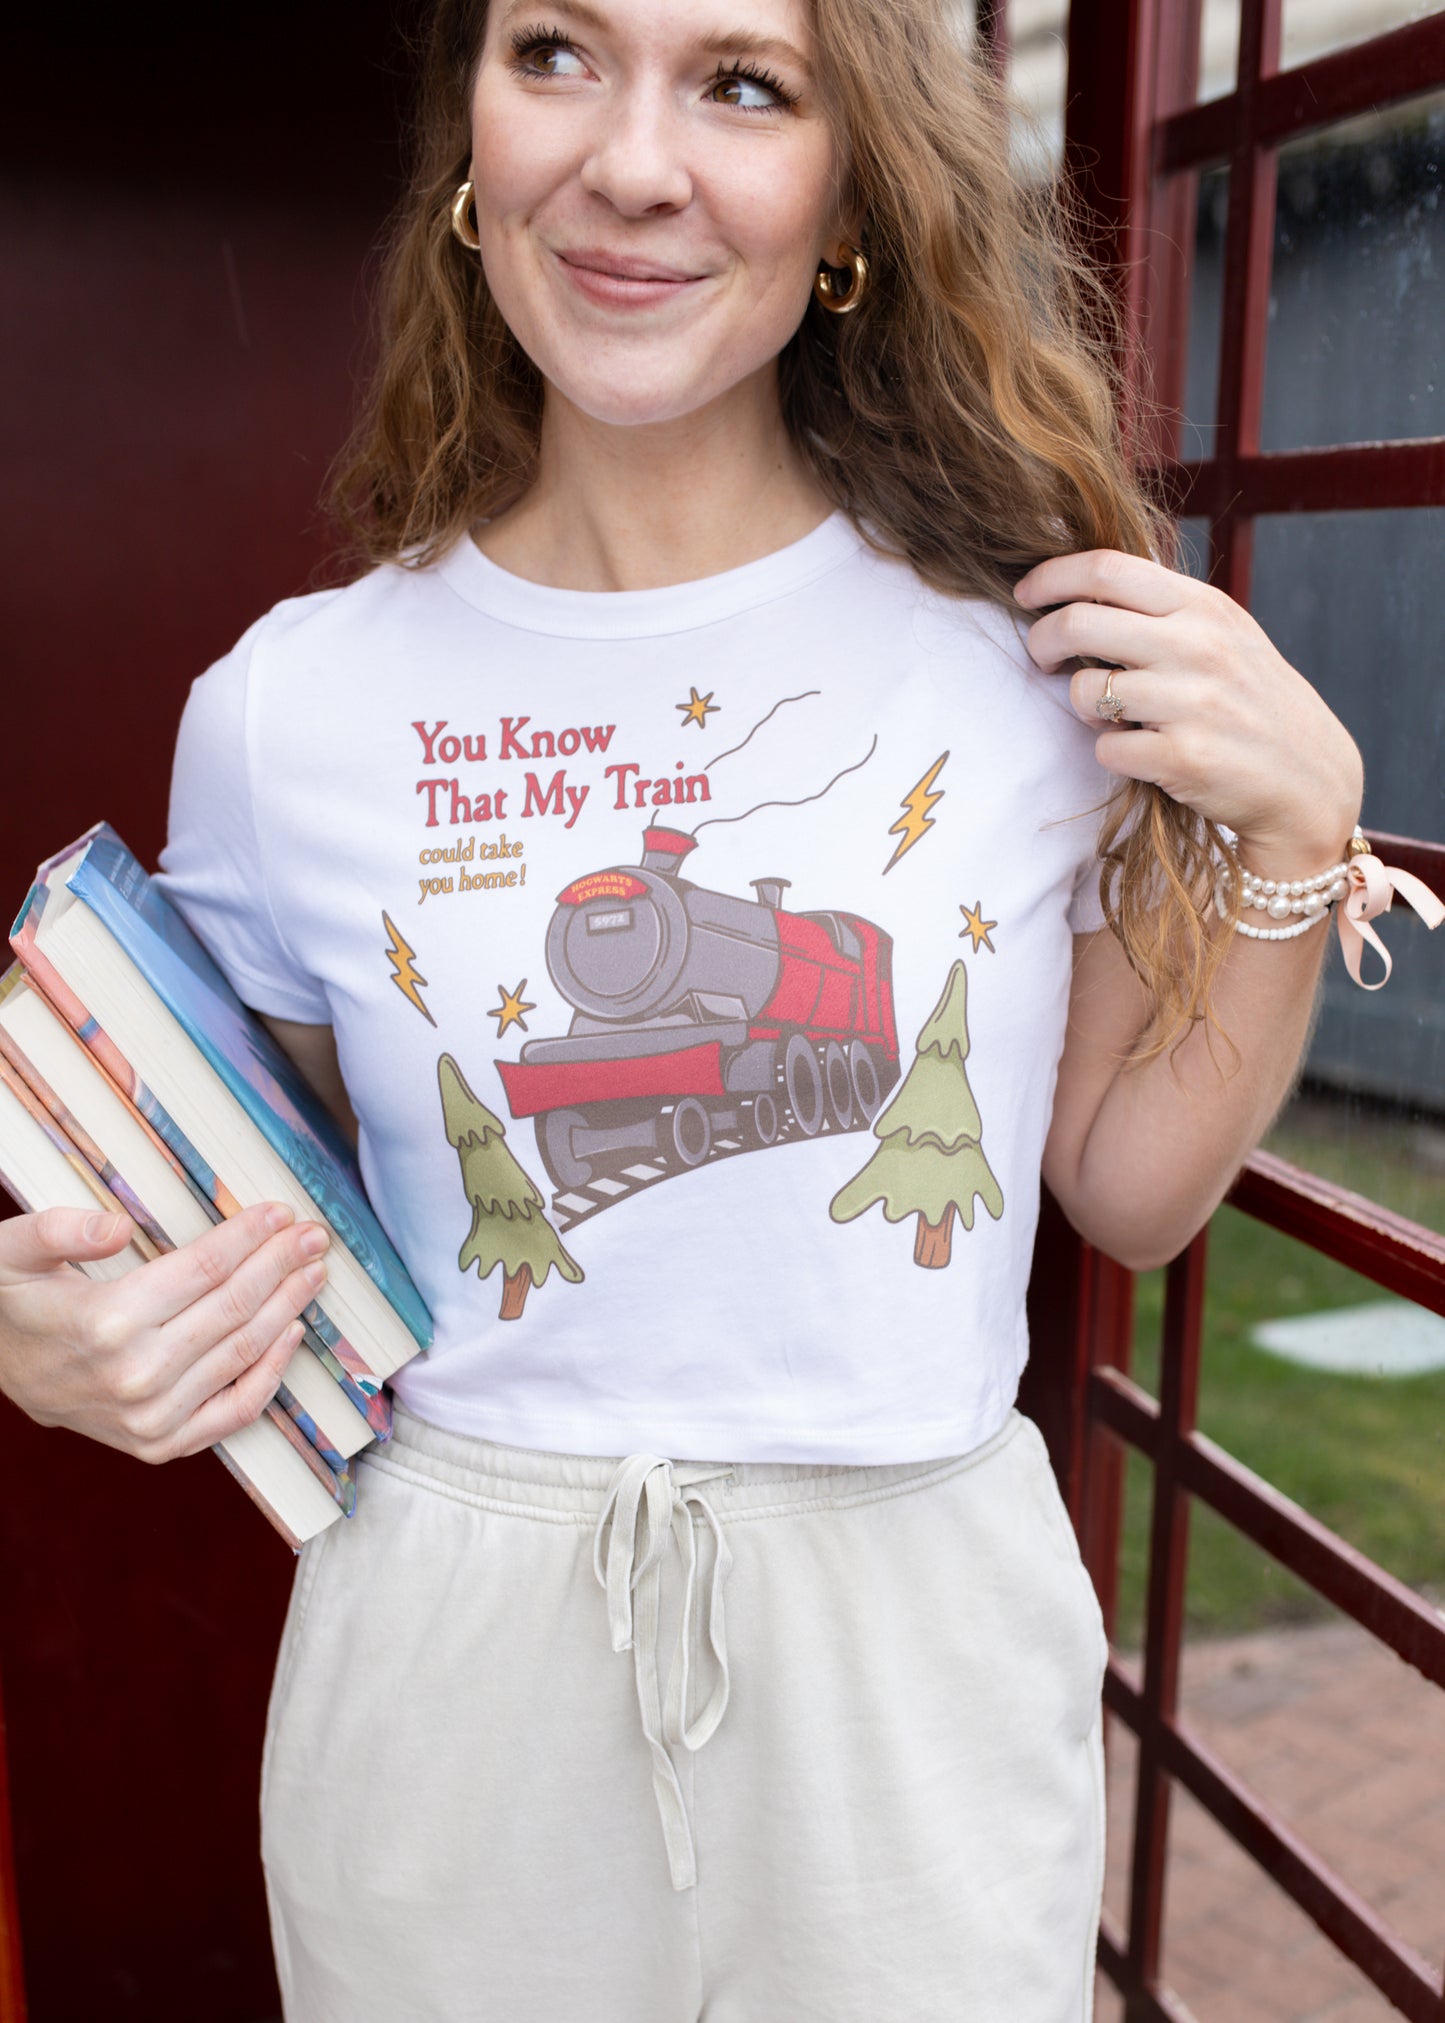 my train could take you home tee